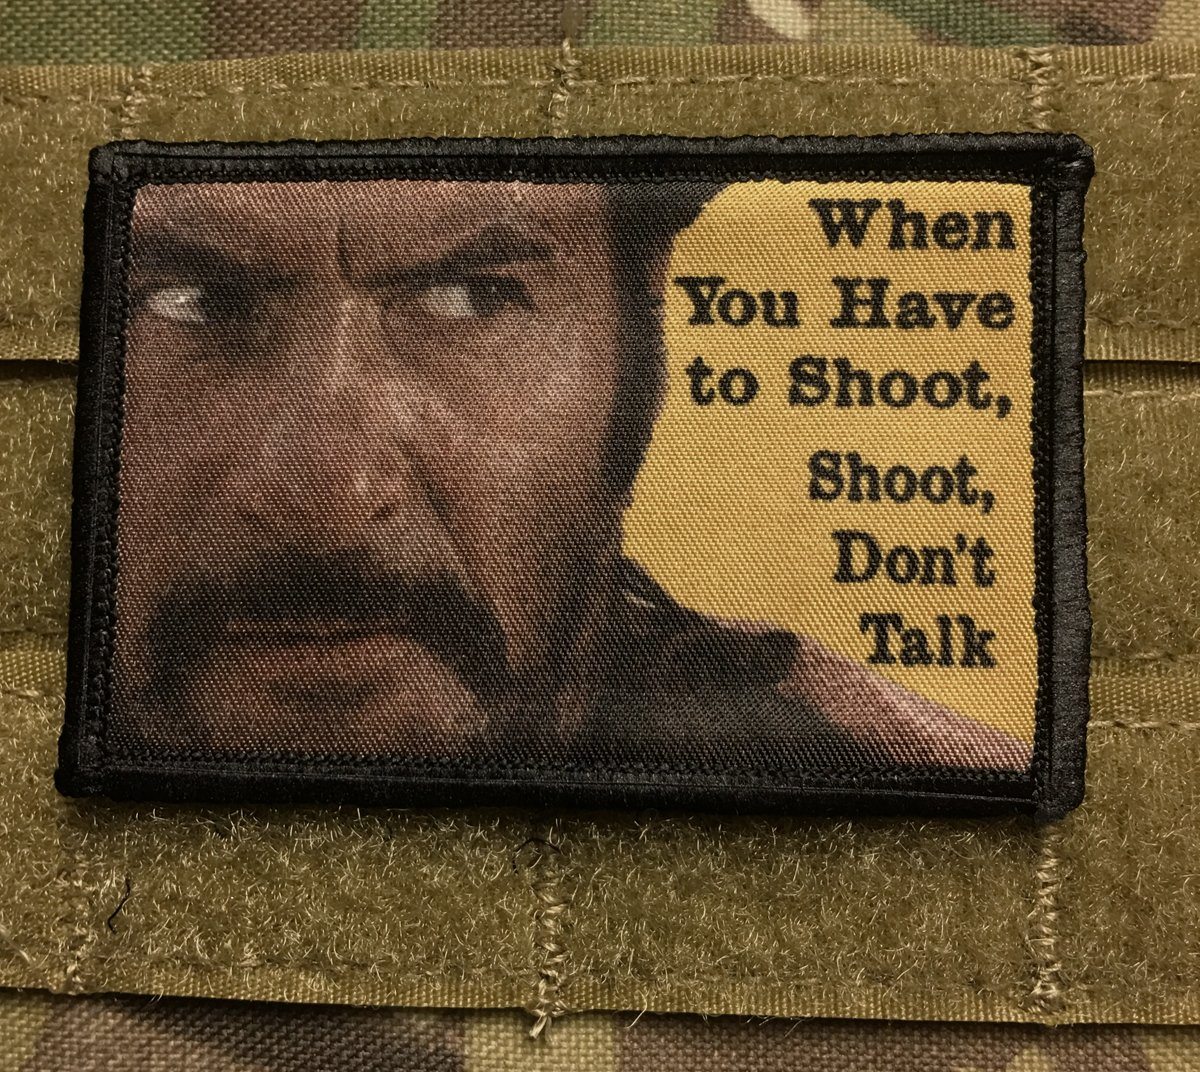 Tuco Ramirez "Shoot" Velcro Morale Patch Morale Patches Redheaded T Shirts 